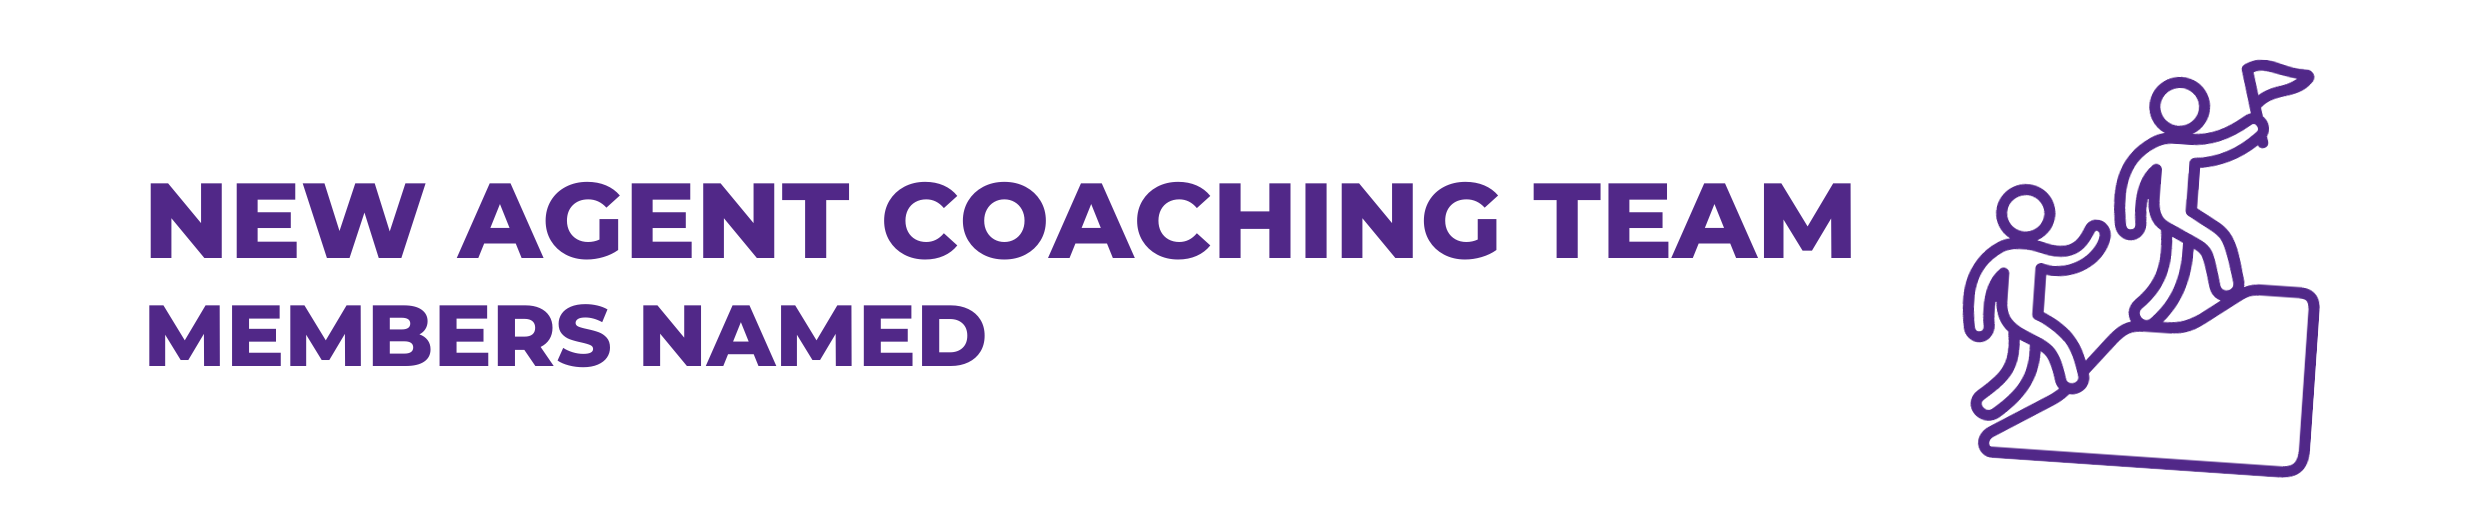 New Agent Coaching Team Members Named